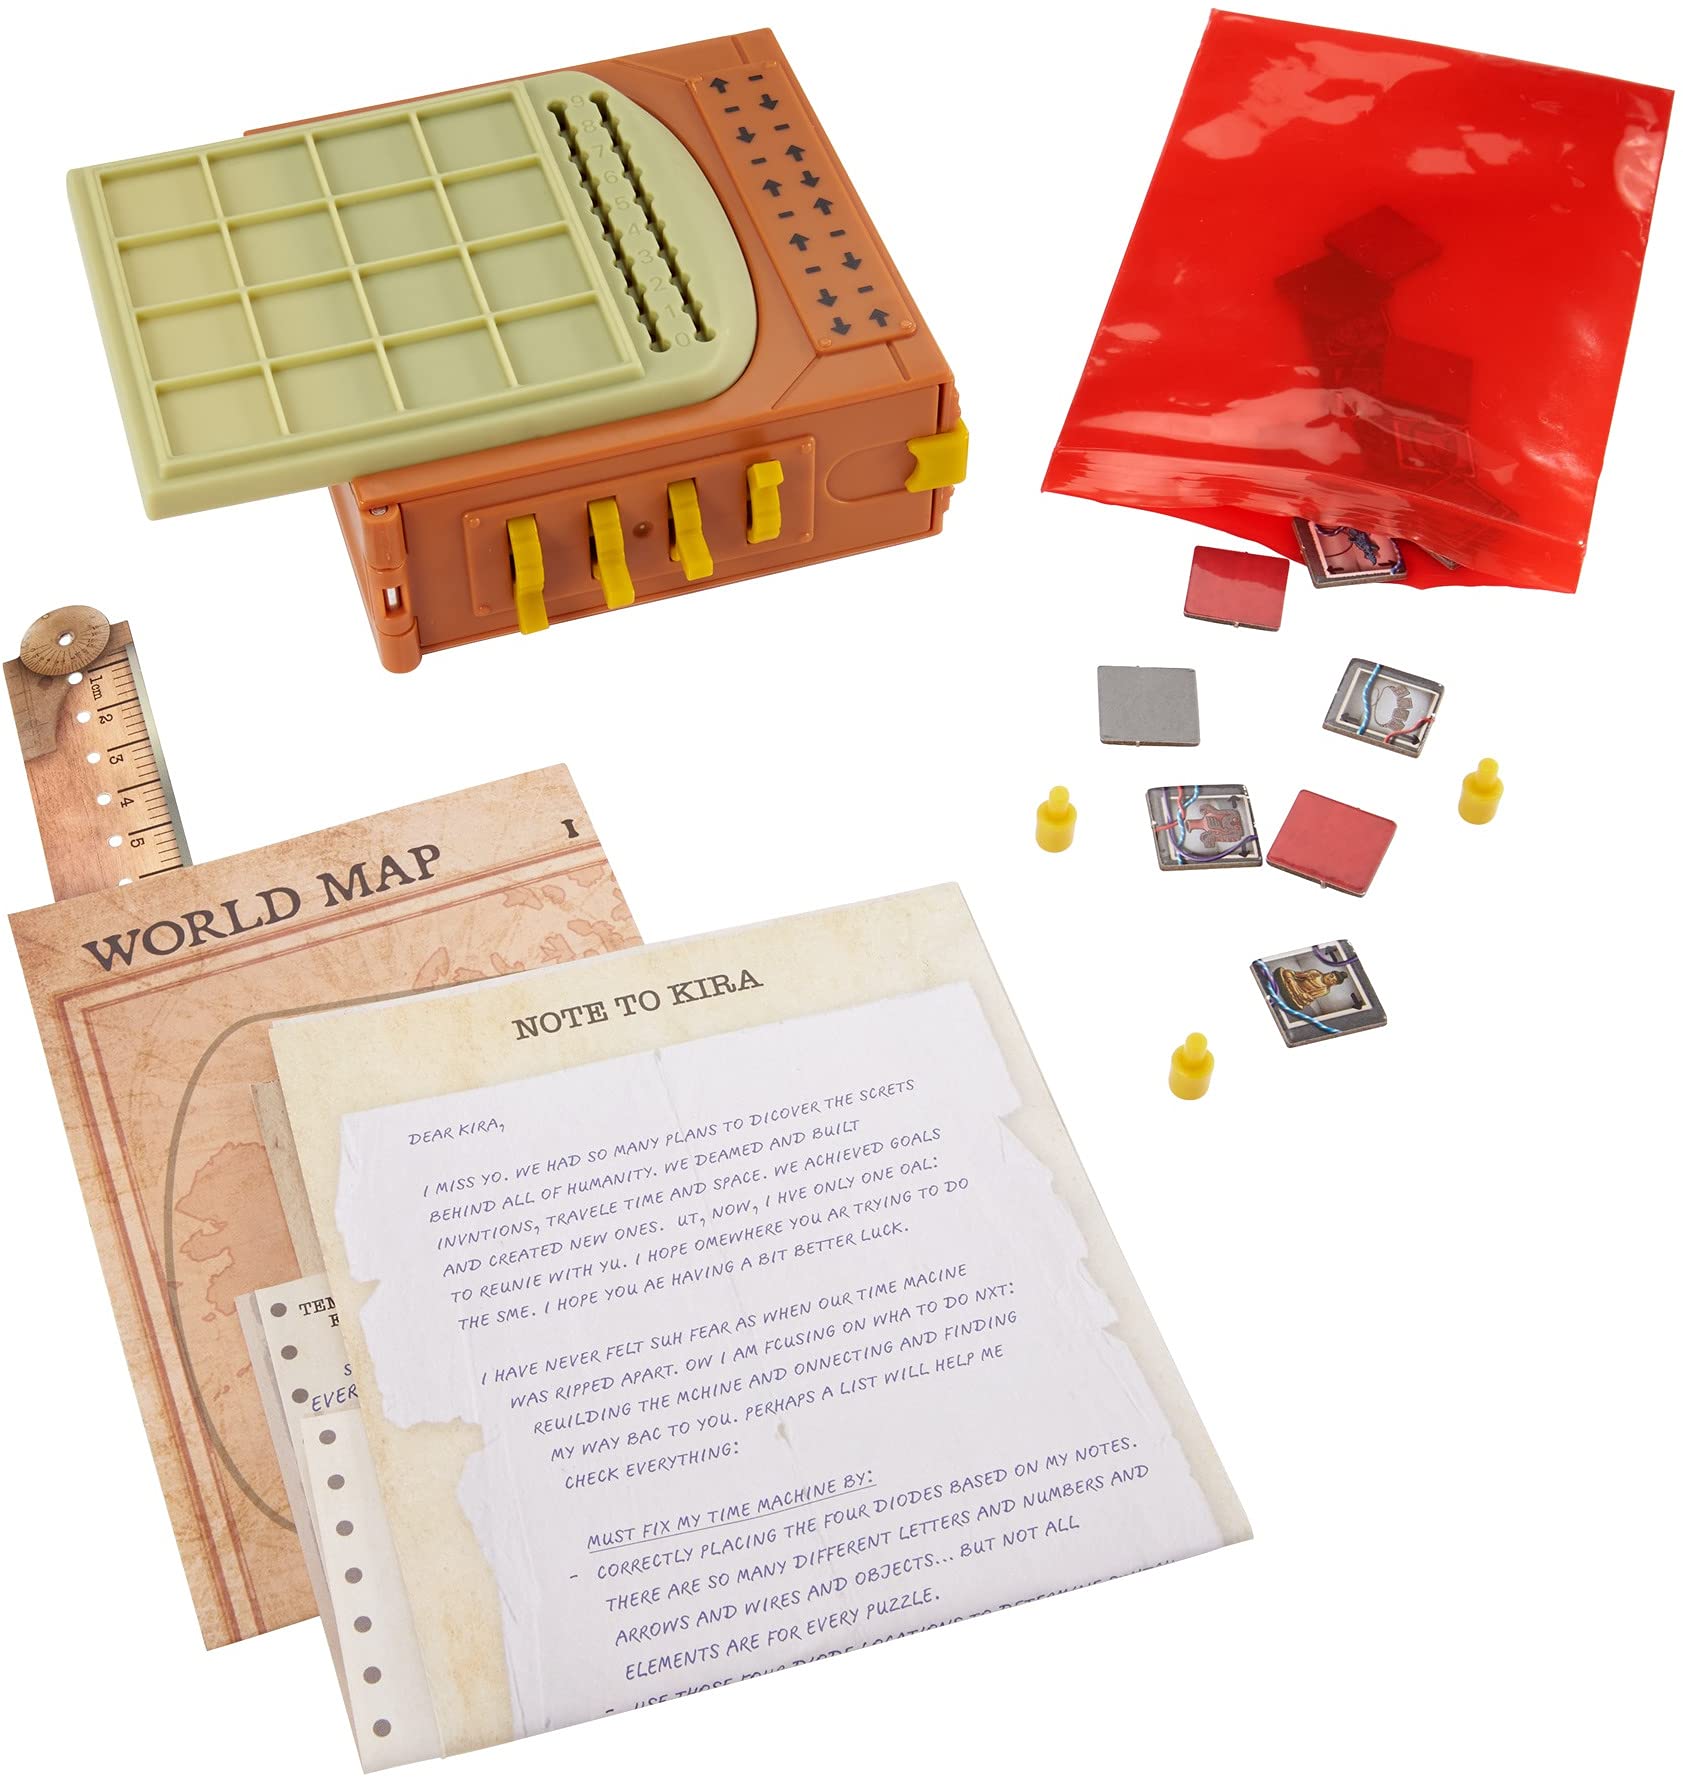 Mattel Games Escape Room in A Box: TIME Drifters ISABEL's Story Party Game for 1 to 4 Players with Clues & Puzzles, Combine with Kira's Story for Remote Play, Gift for 13 Year Olds & Up